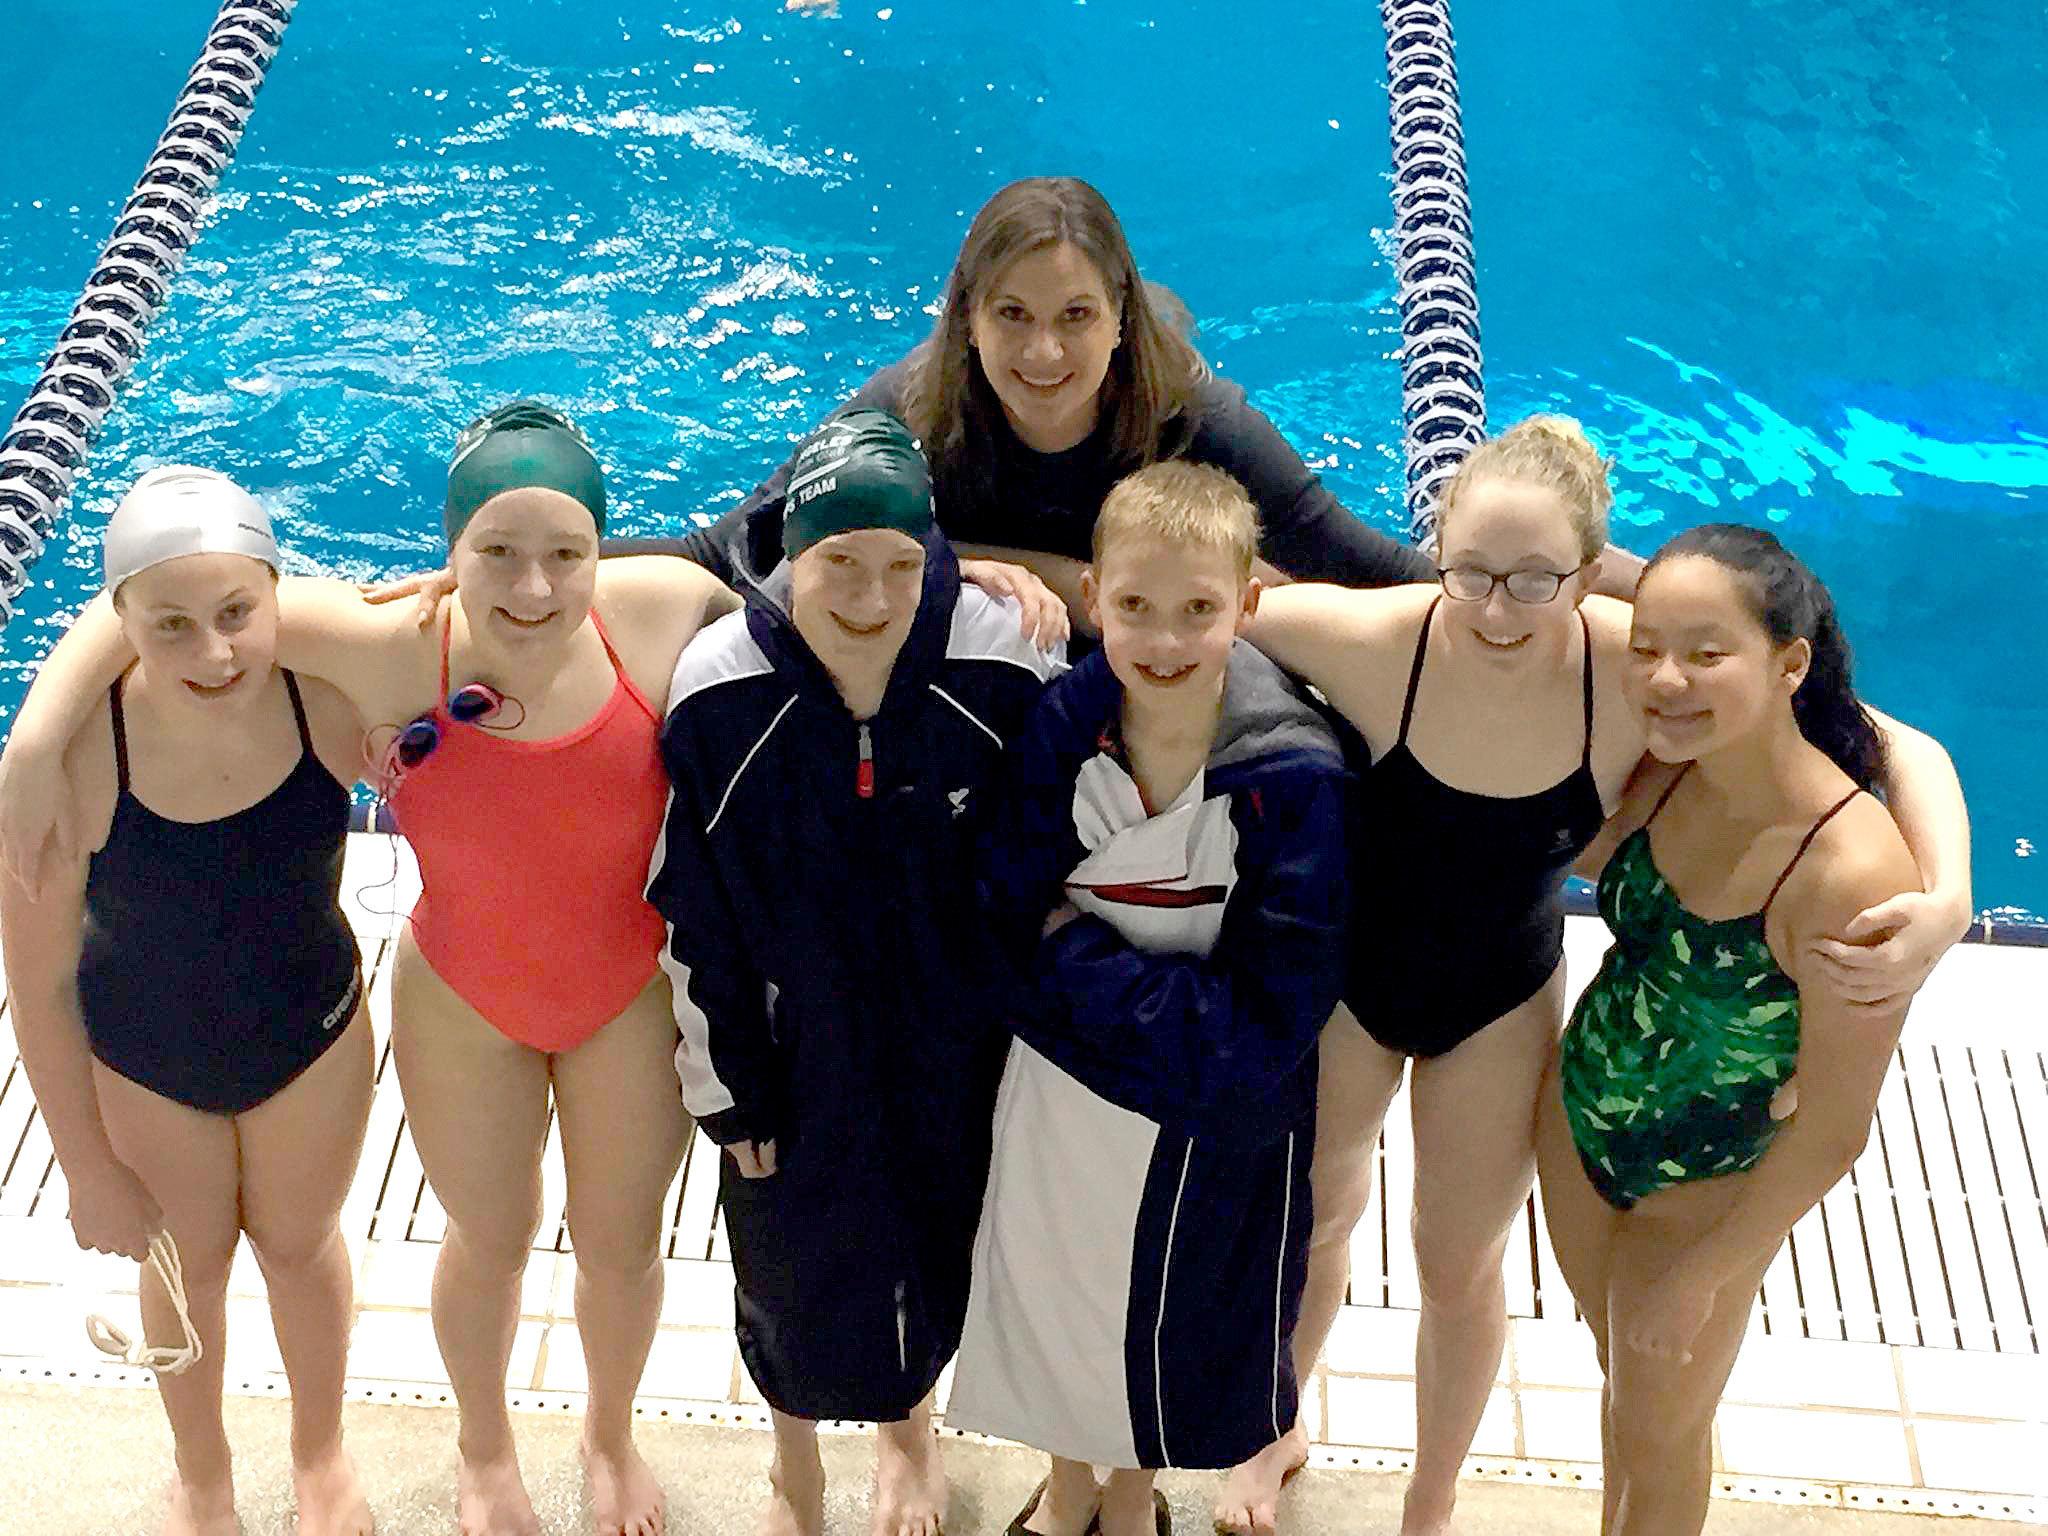 Courtesy photo The Port Angeles Swim Club recently competed at the Pacific Northwest Swim Championships in Federal Way. From left are MacKenzie DuBois (11), Emma Murray (14), Josh Gavin (12), Adam Weller (12), Nadia Cole( 14), Felicia Che (14). In back is swim club coach Jessica Johnson.                                Courtesy photo                                The Port Angeles Swim Club recently competed at the Pacific Northwest Swim Championships in Federal Way. From left are MacKenzie DuBois, age 11; Emma Murray, 14; Josh Gavin, 12; Adam Weller, 12; Nadia Cole, 14; Felicia Che, 14. In back is swim club coach Jessica Johnson.